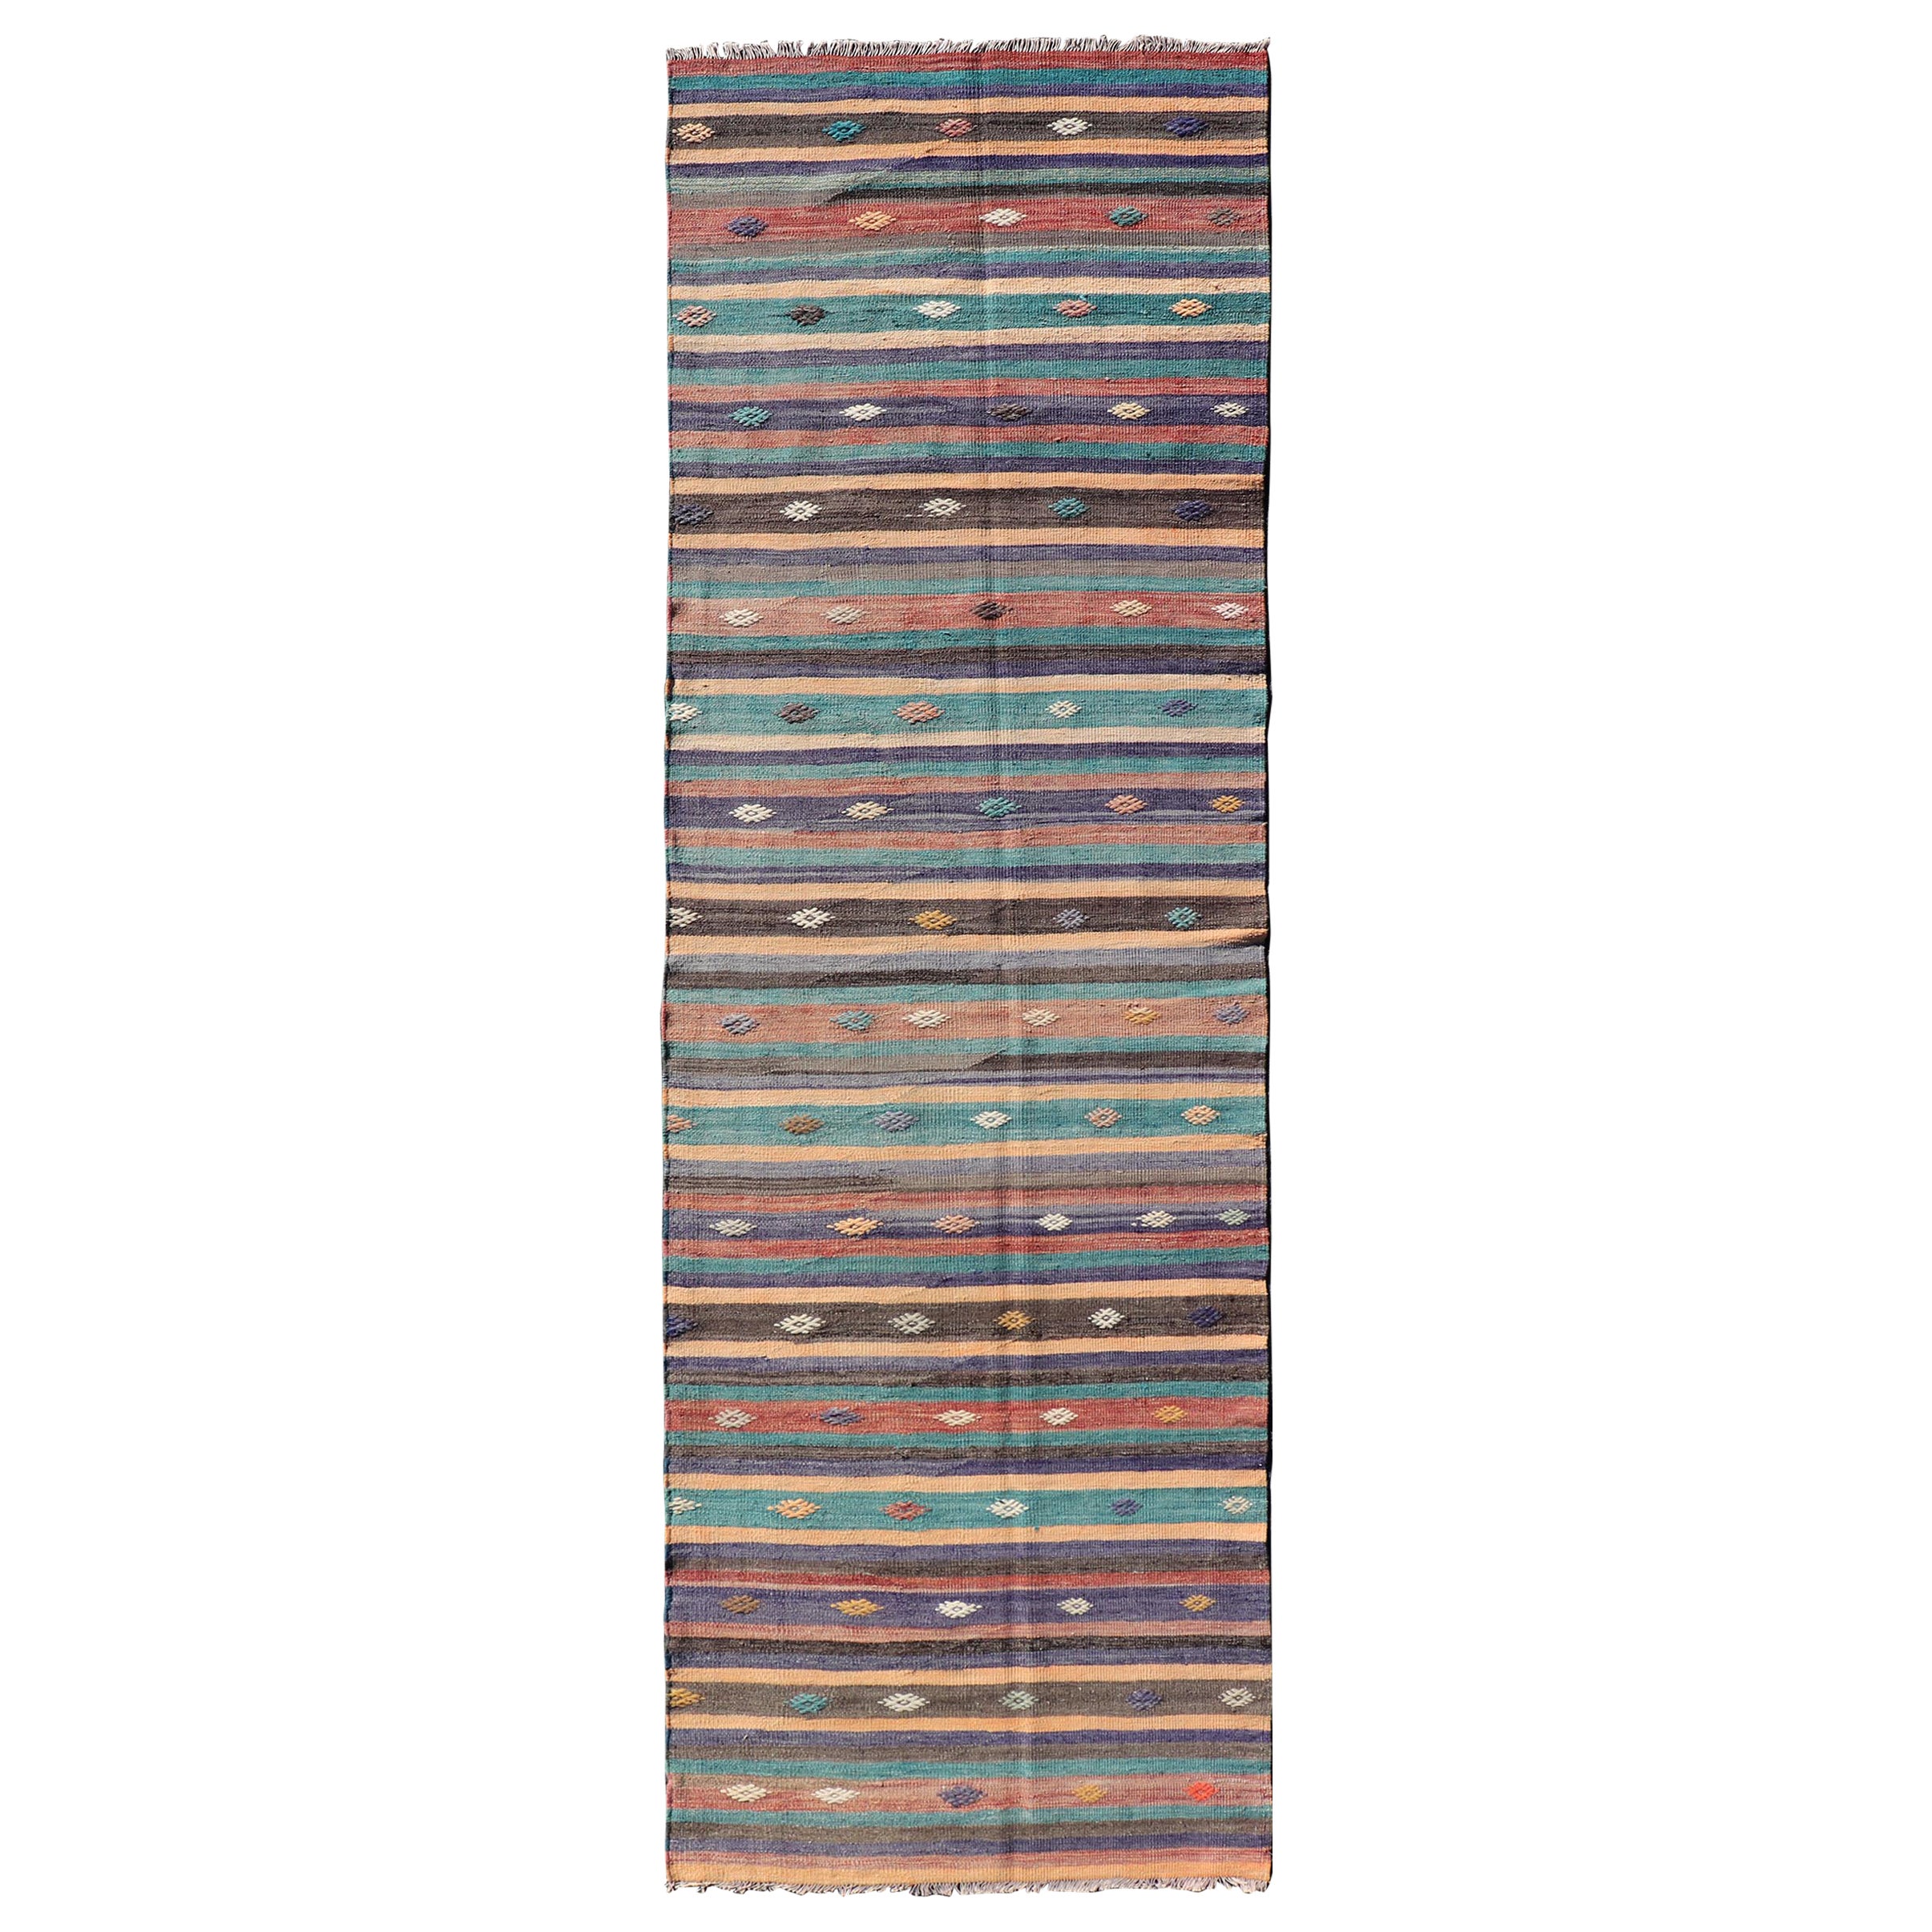 Colorful Vintage Embroidered Kilim Runner with Stripe's and Geometric Motifs For Sale